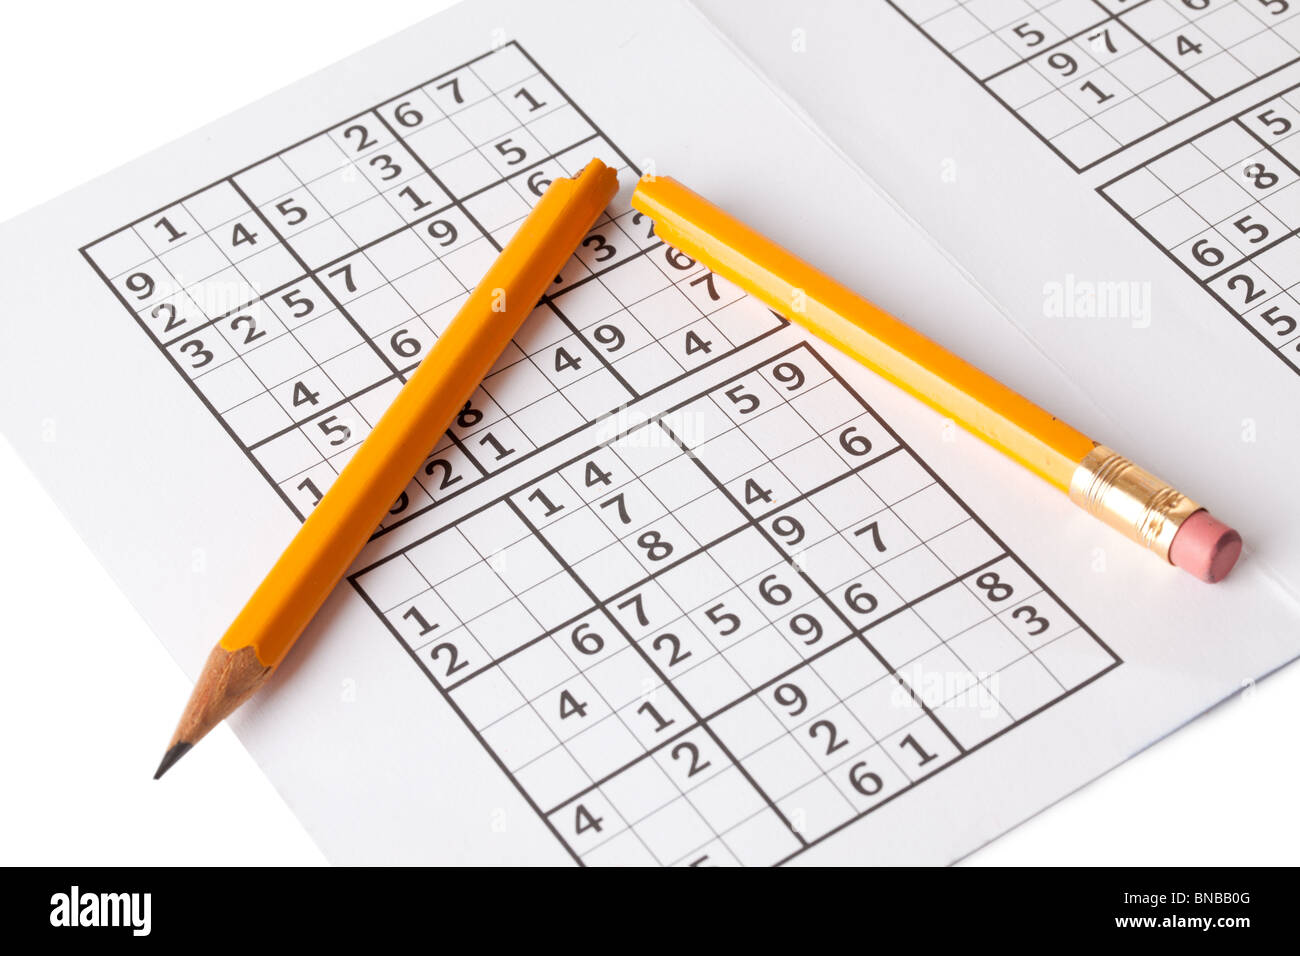 sudoku game and pencil Stock Photo